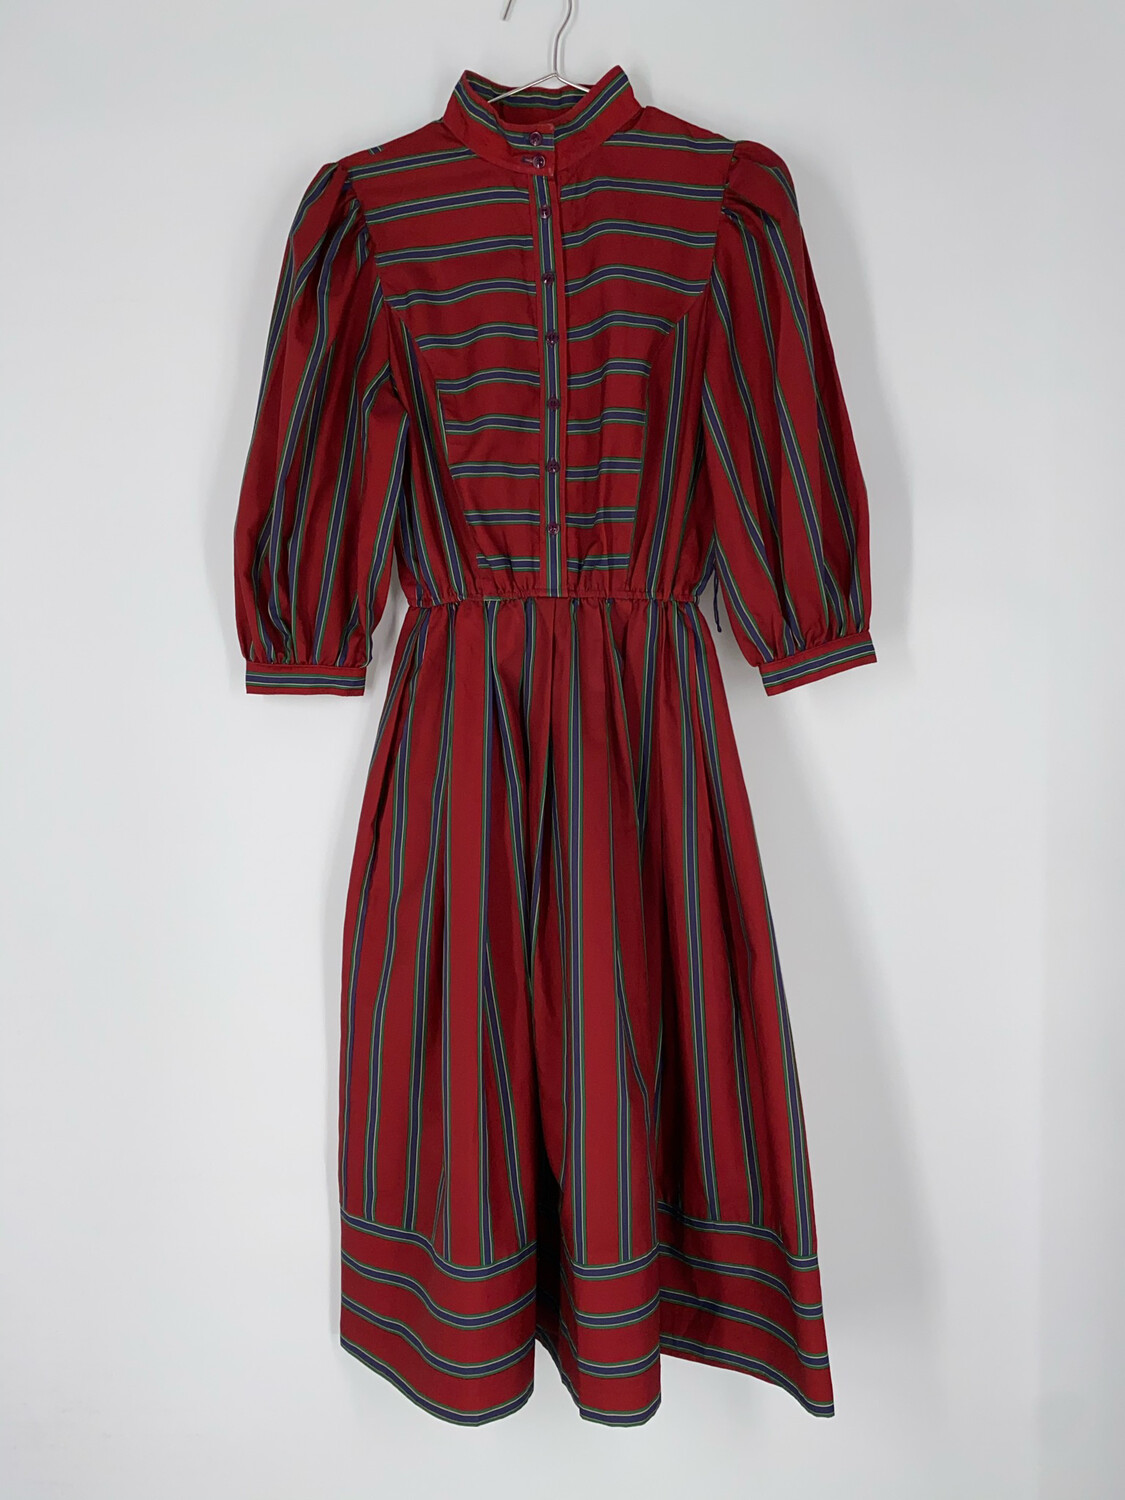 Joan Sparks For Daniel Barrett Red Striped Button Up Dress Size S